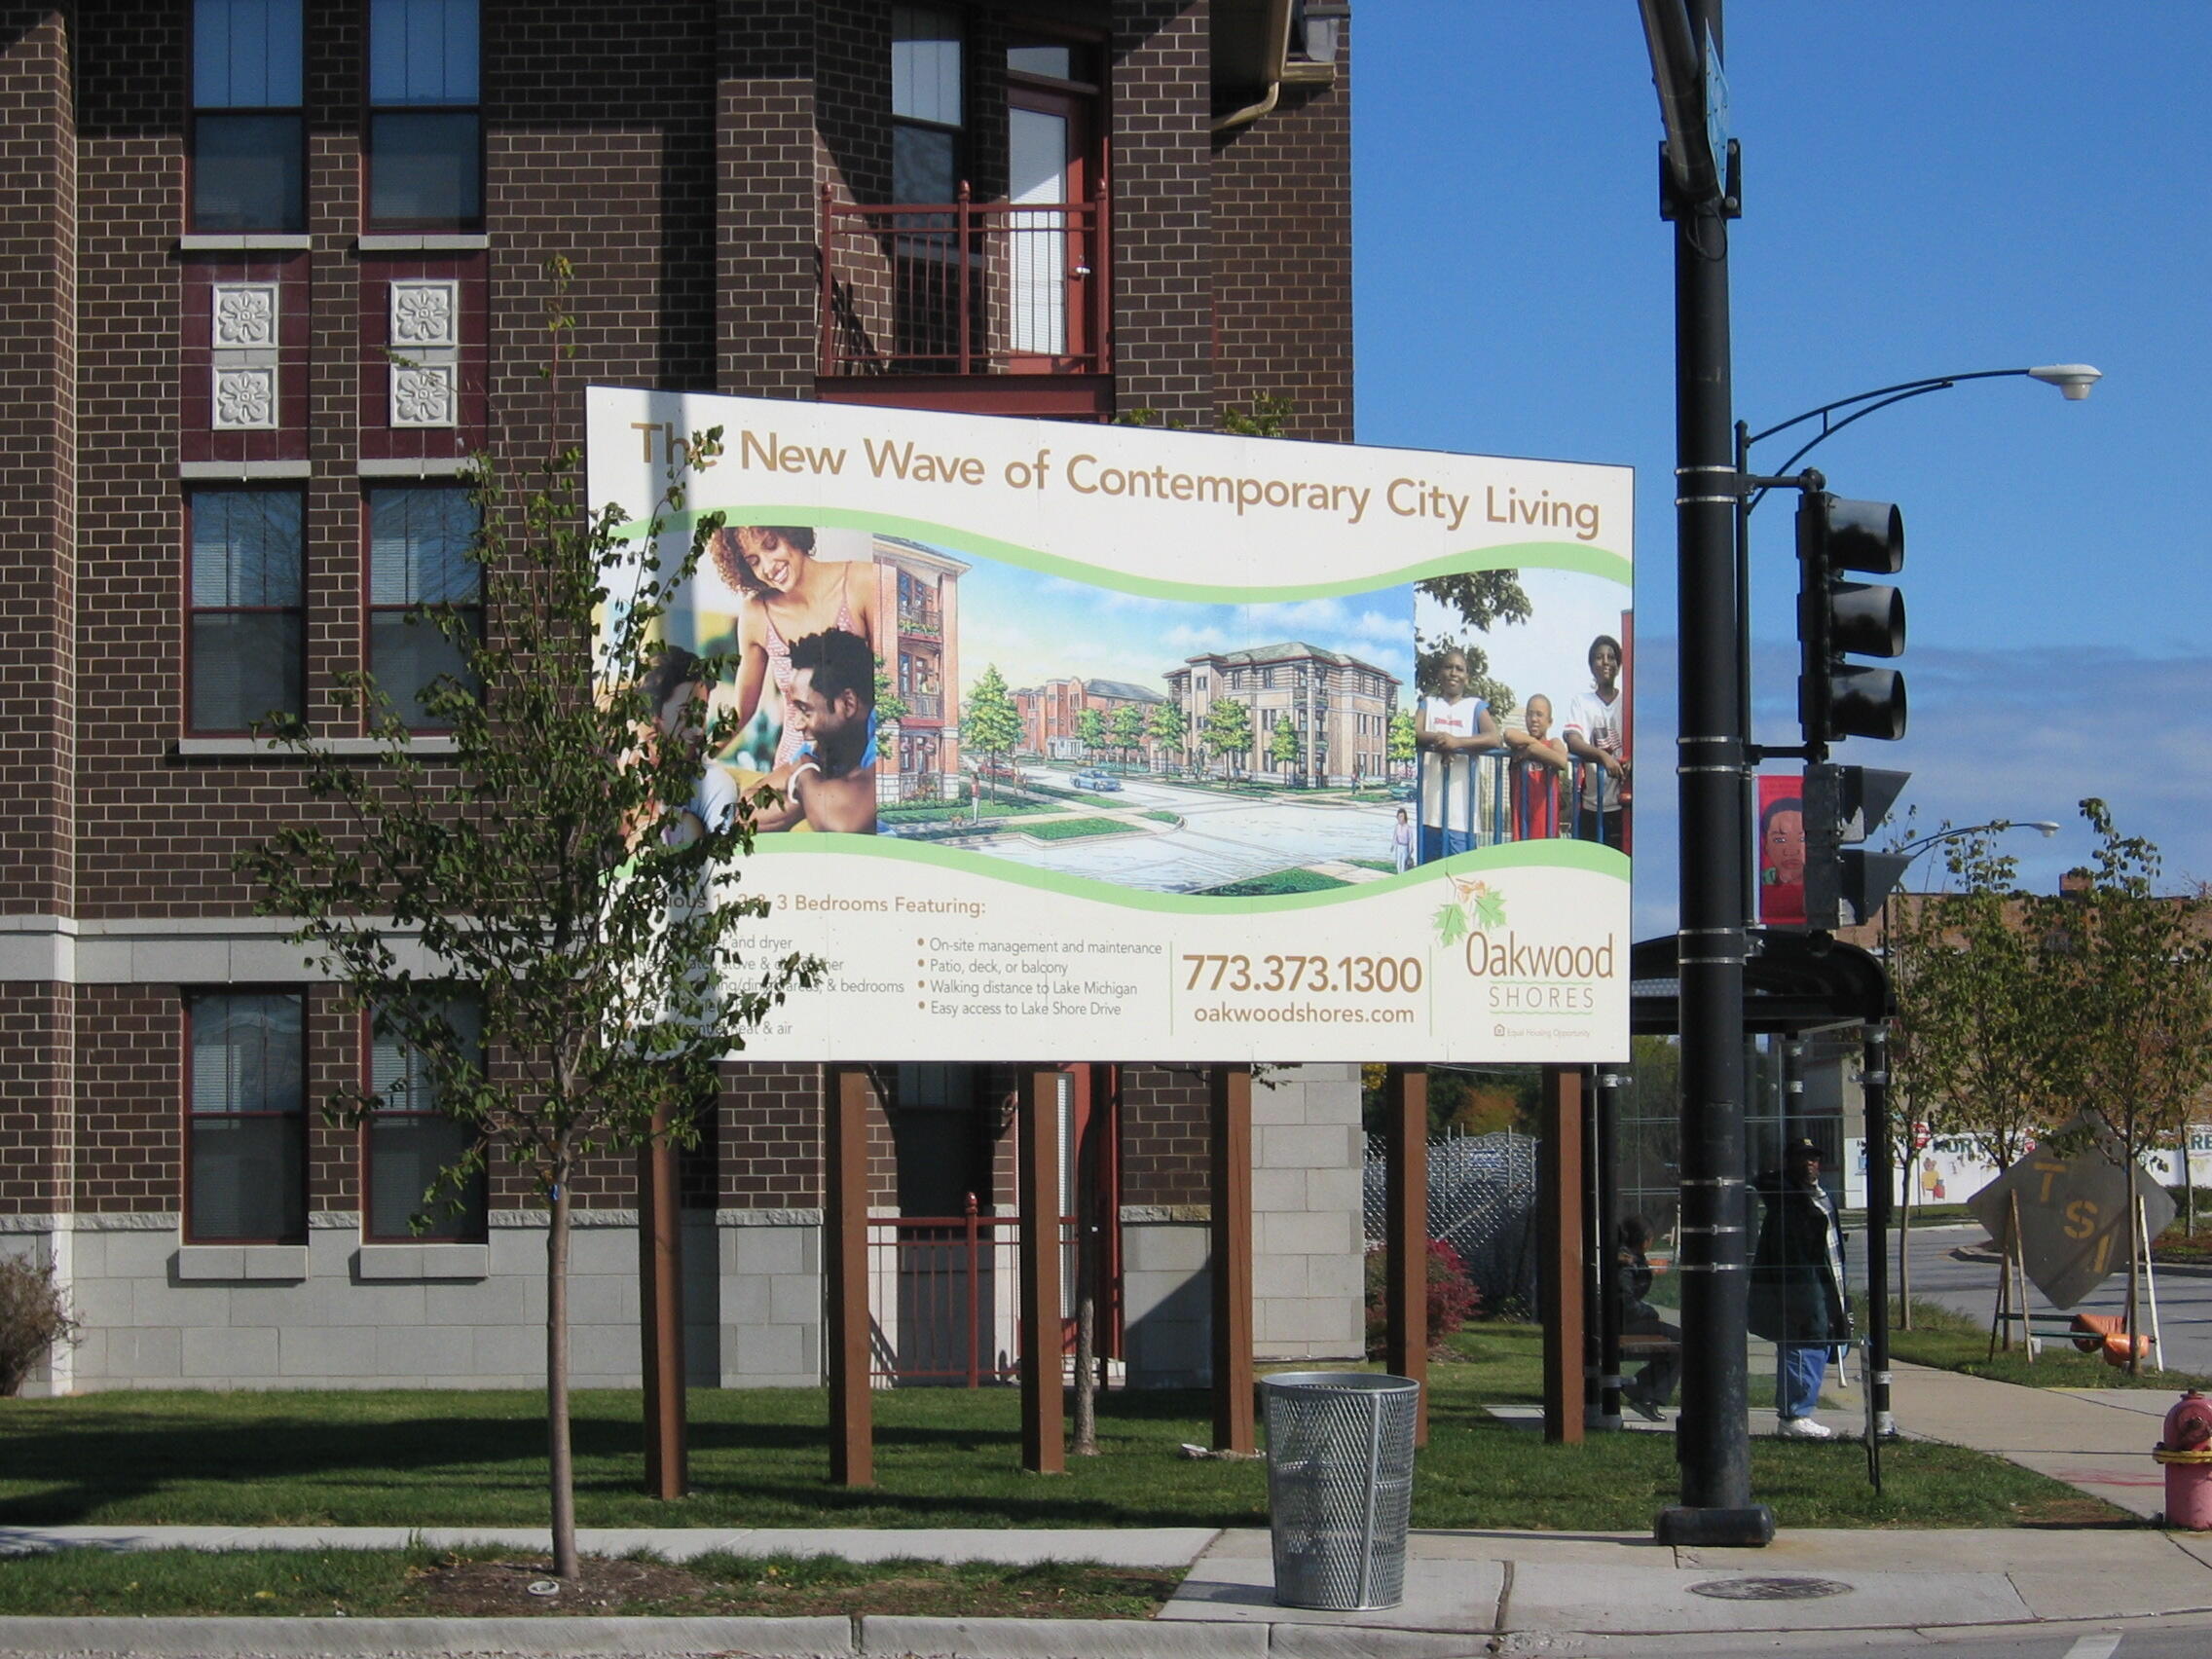 Oakwood Shores, the mixed-income development on the Wells site where Michelle and Tonya moved